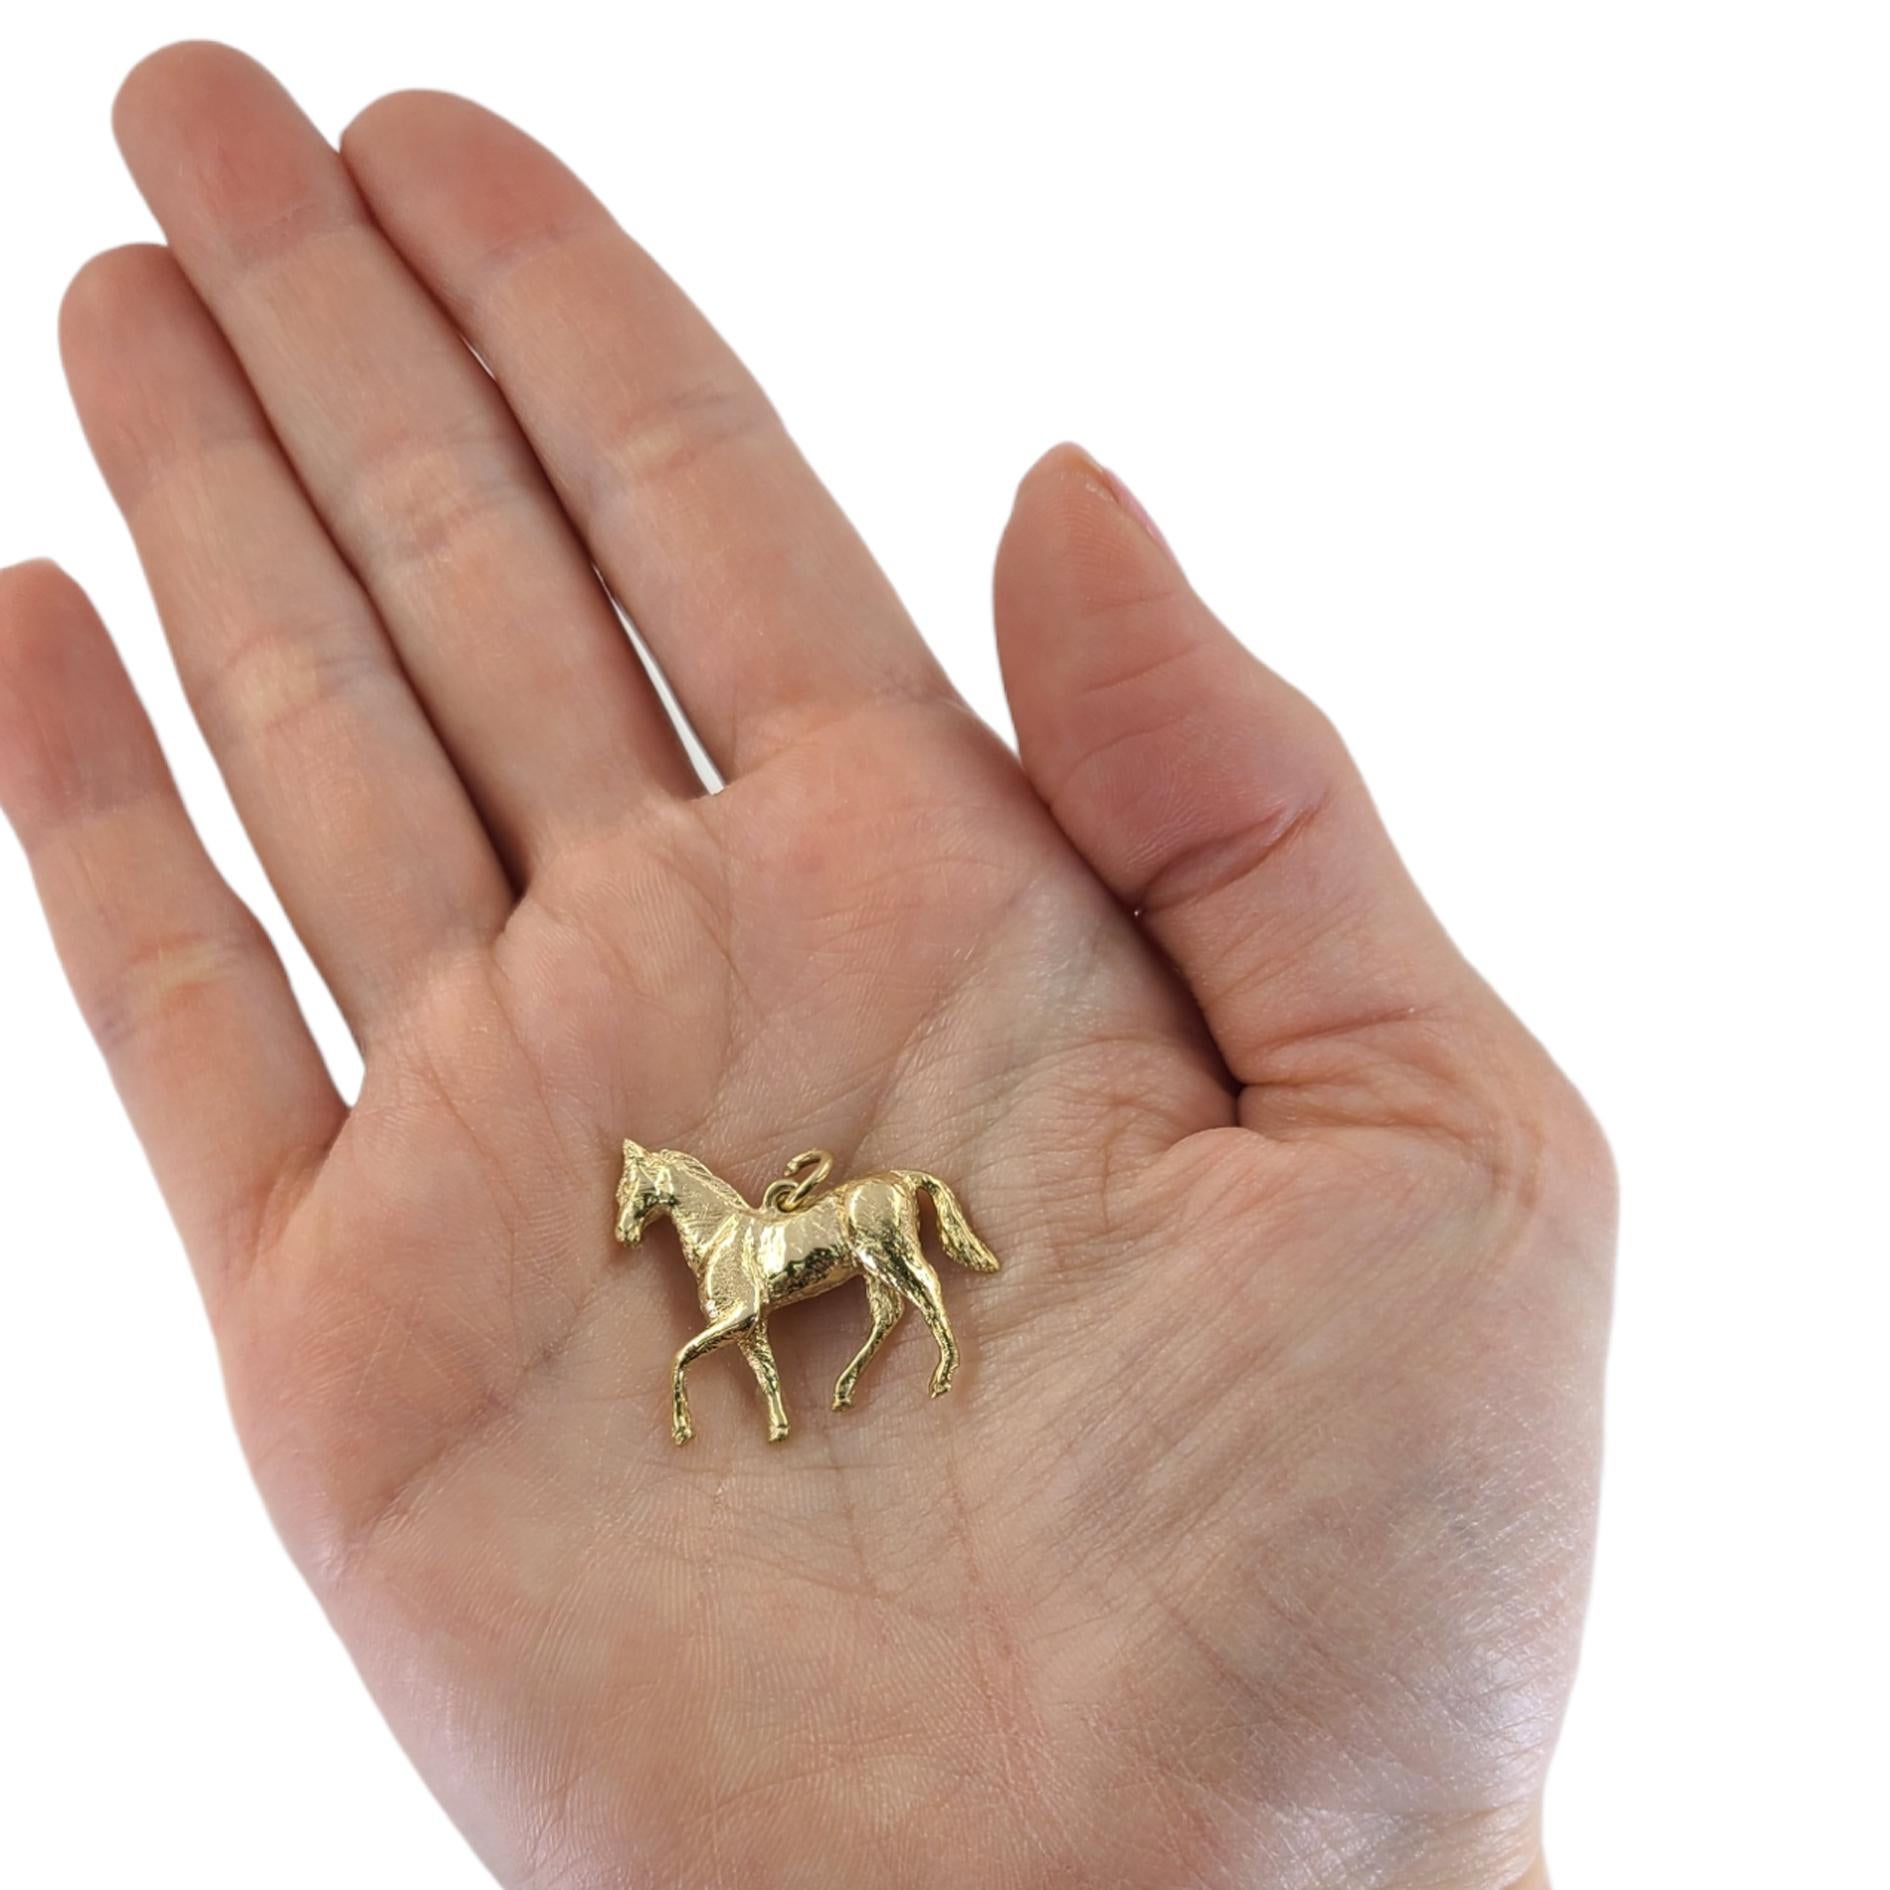 14 Karat Yellow Gold Walking Horse Pendant/Charm With Textured Accents. 1 Inch Width By 0.88 Inch Length. Finished Weight Is 6.5 Grams.